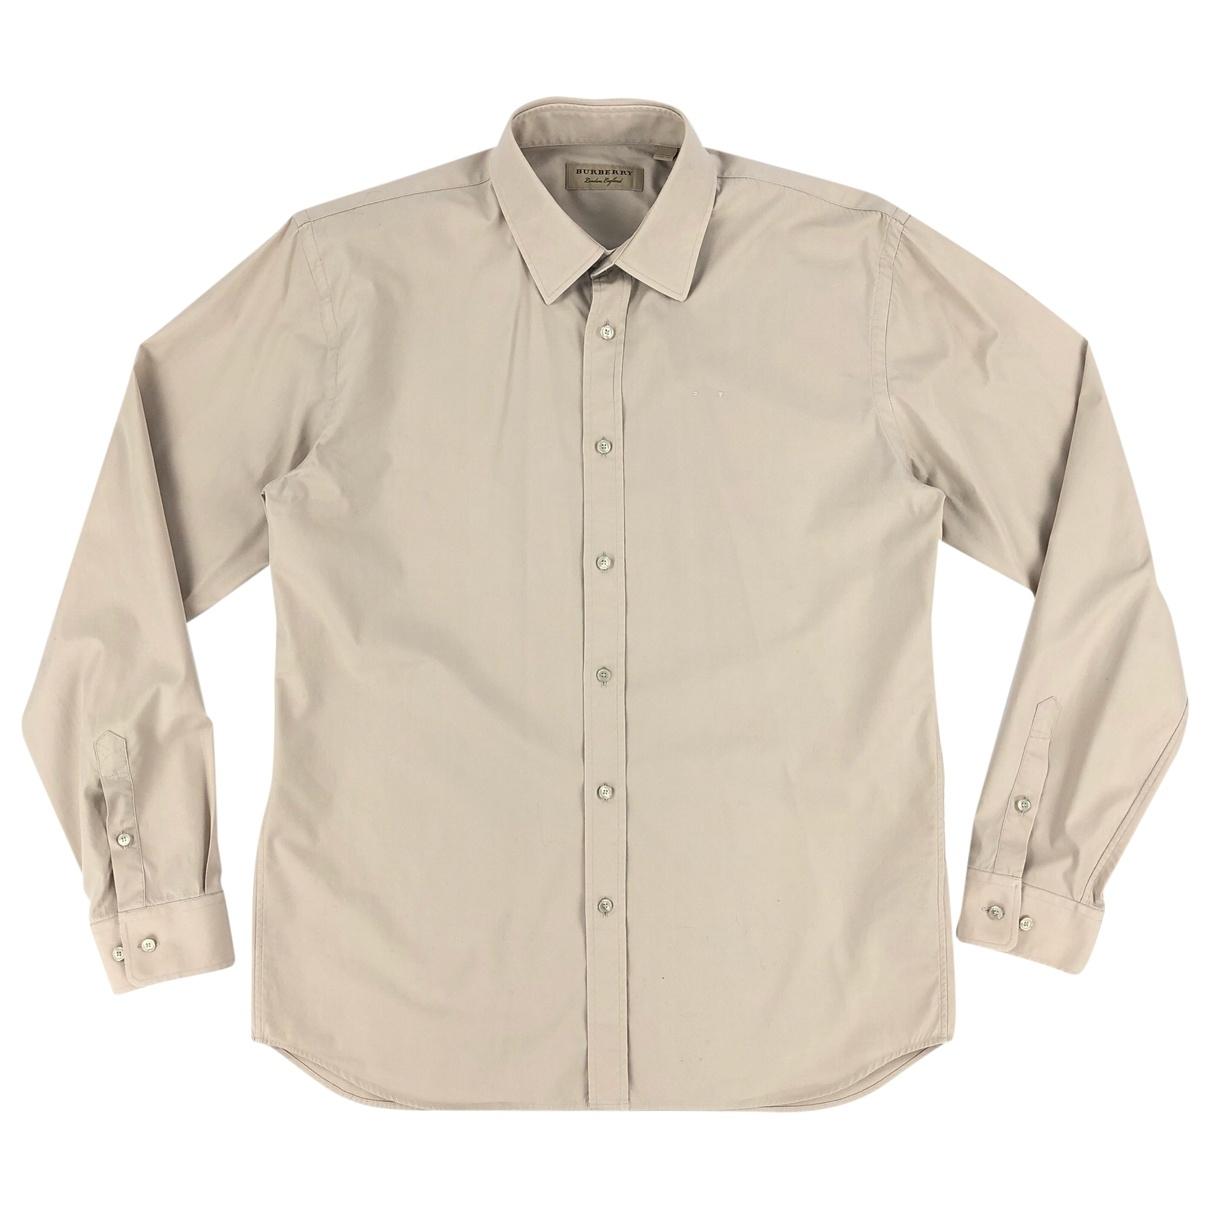 Burberry Beige Cotton Shirt in Natural for Men - Lyst